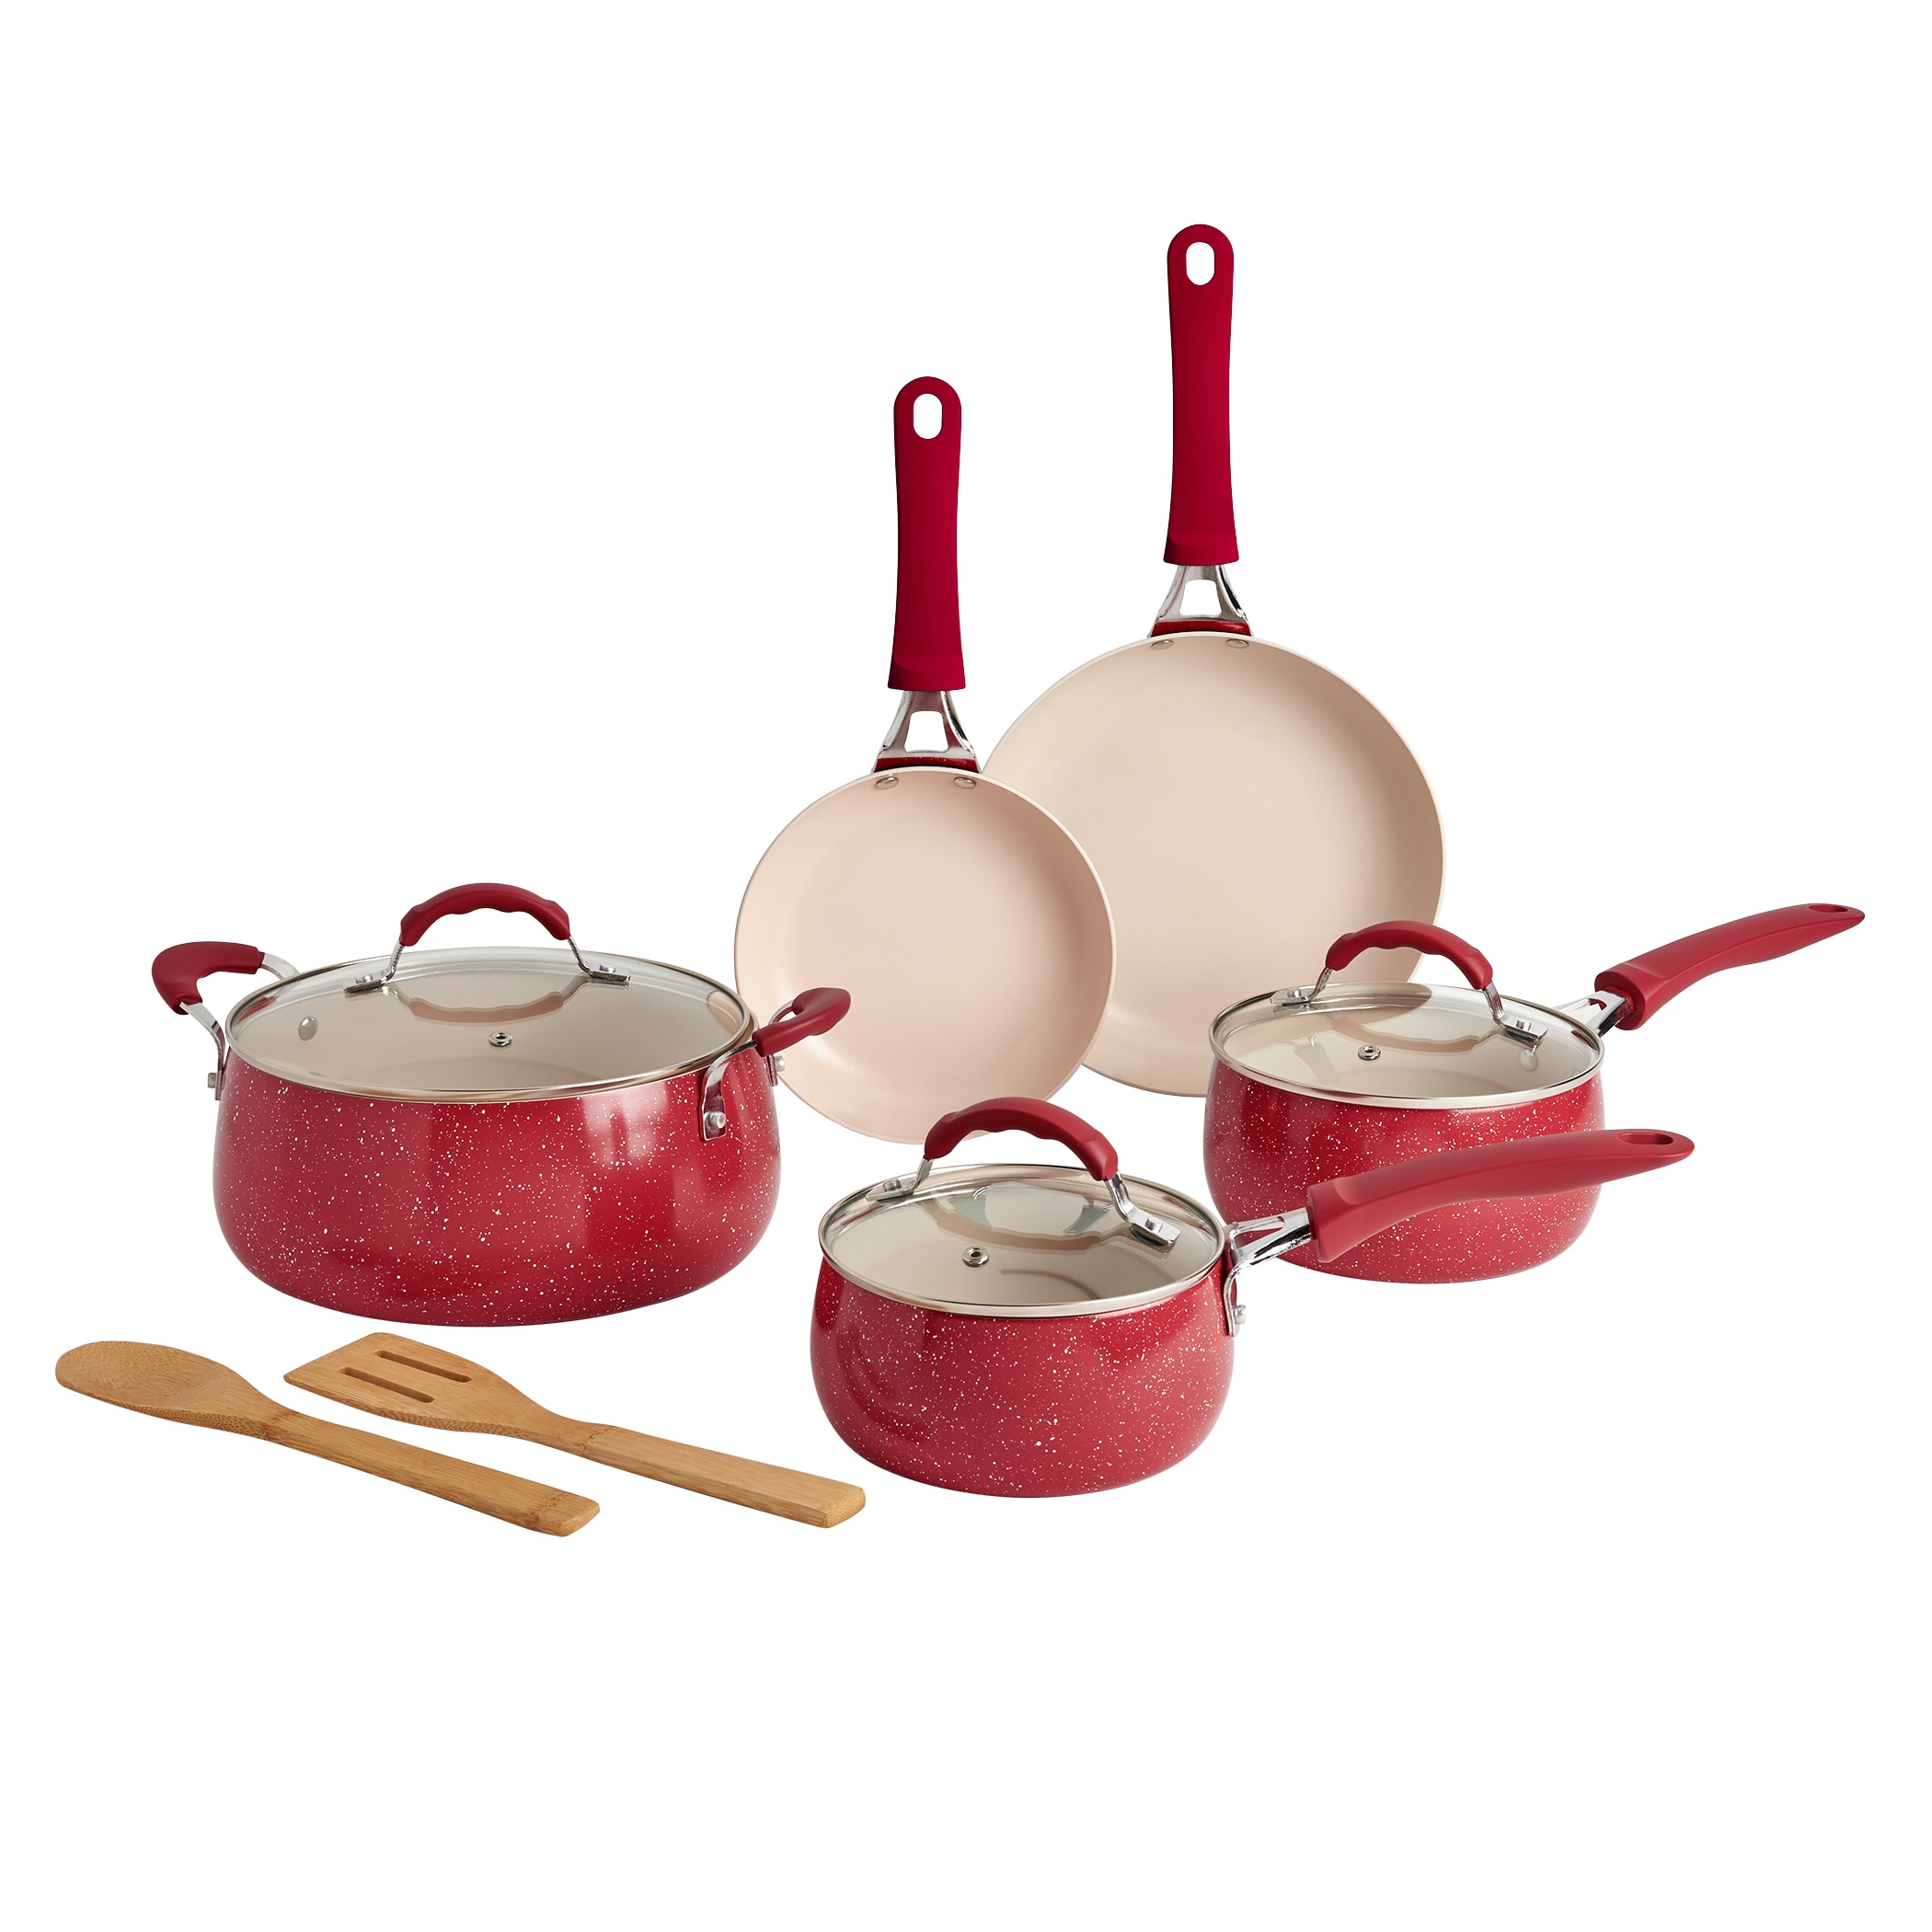 Artisan Healthy Ceramic Nonstick, 12pc Cookware Set, Soft Pink. - none